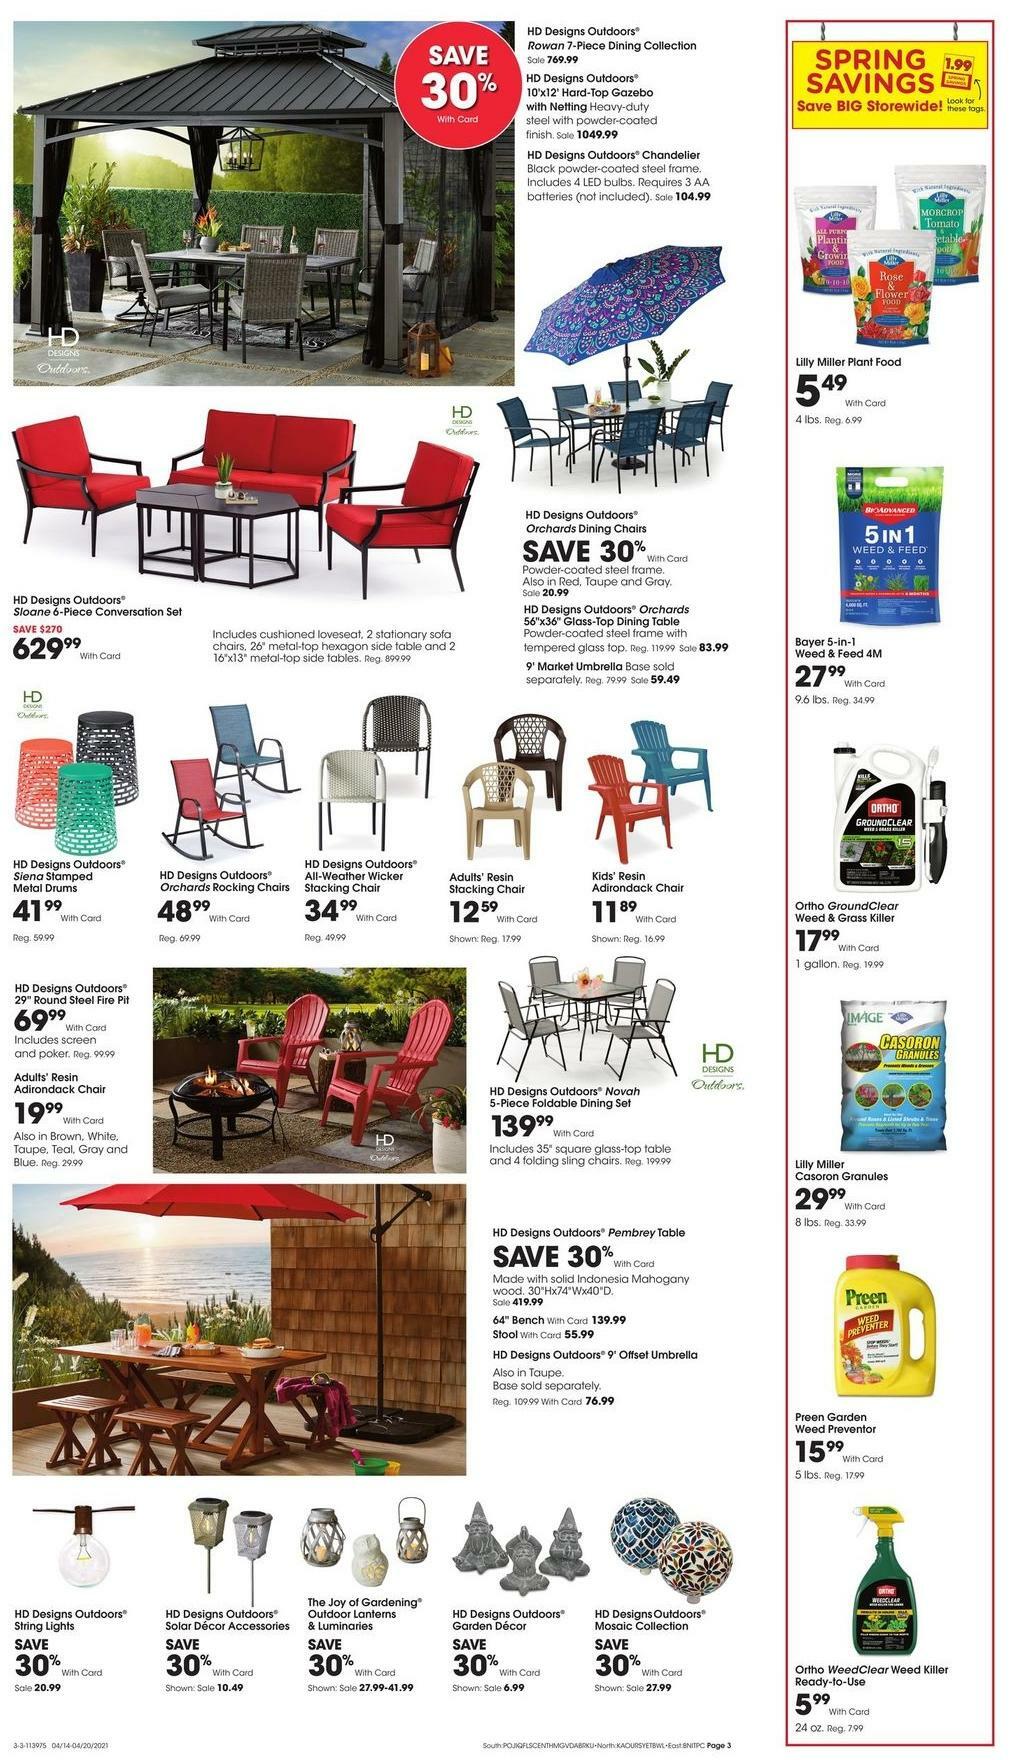 Fred Meyer Garden Weekly Ad from April 14